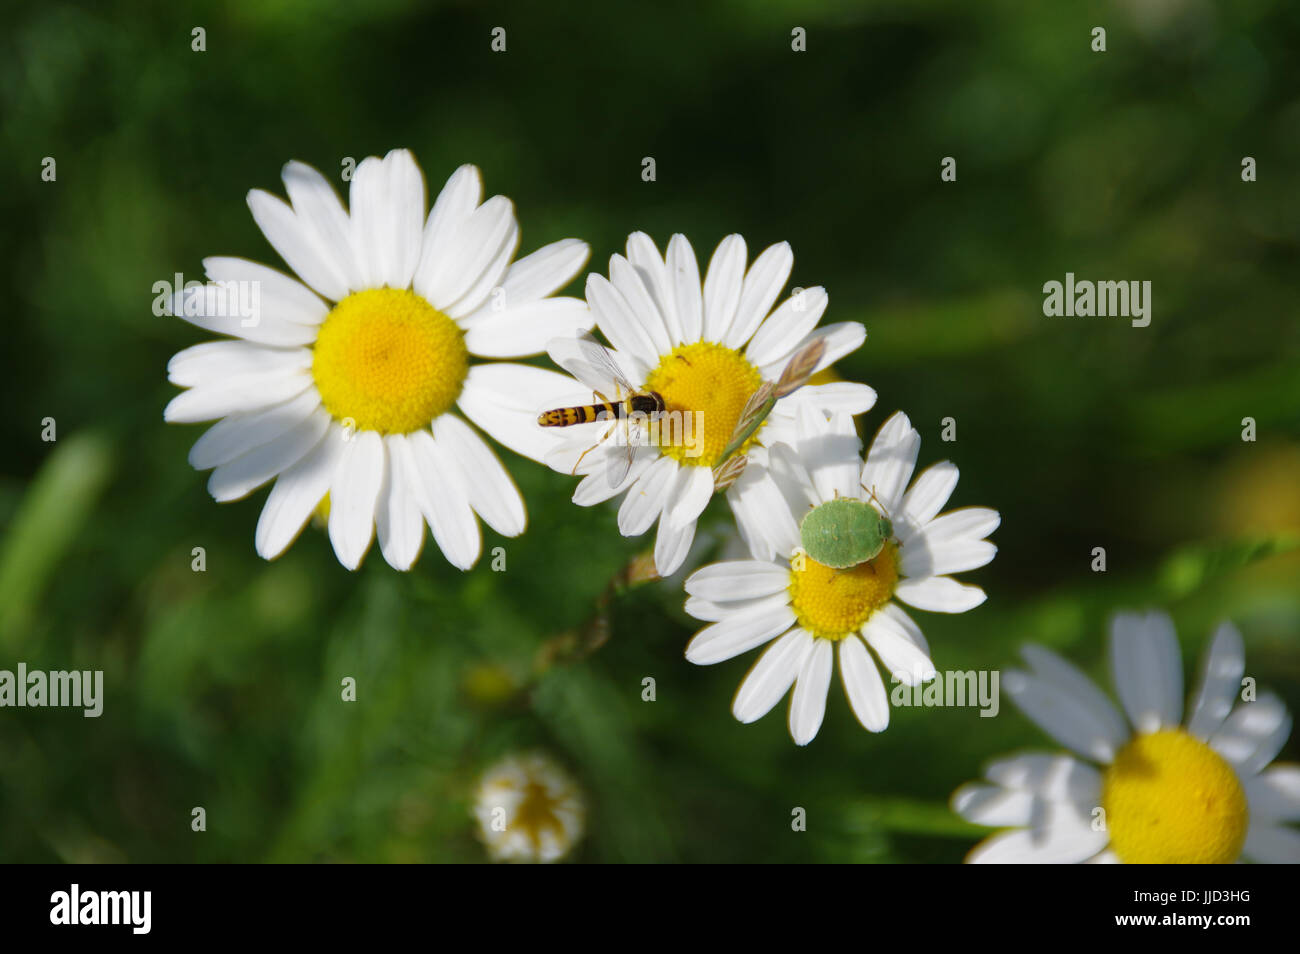 Two friends - wasp and green shield bug on daisy flowers Stock Photo